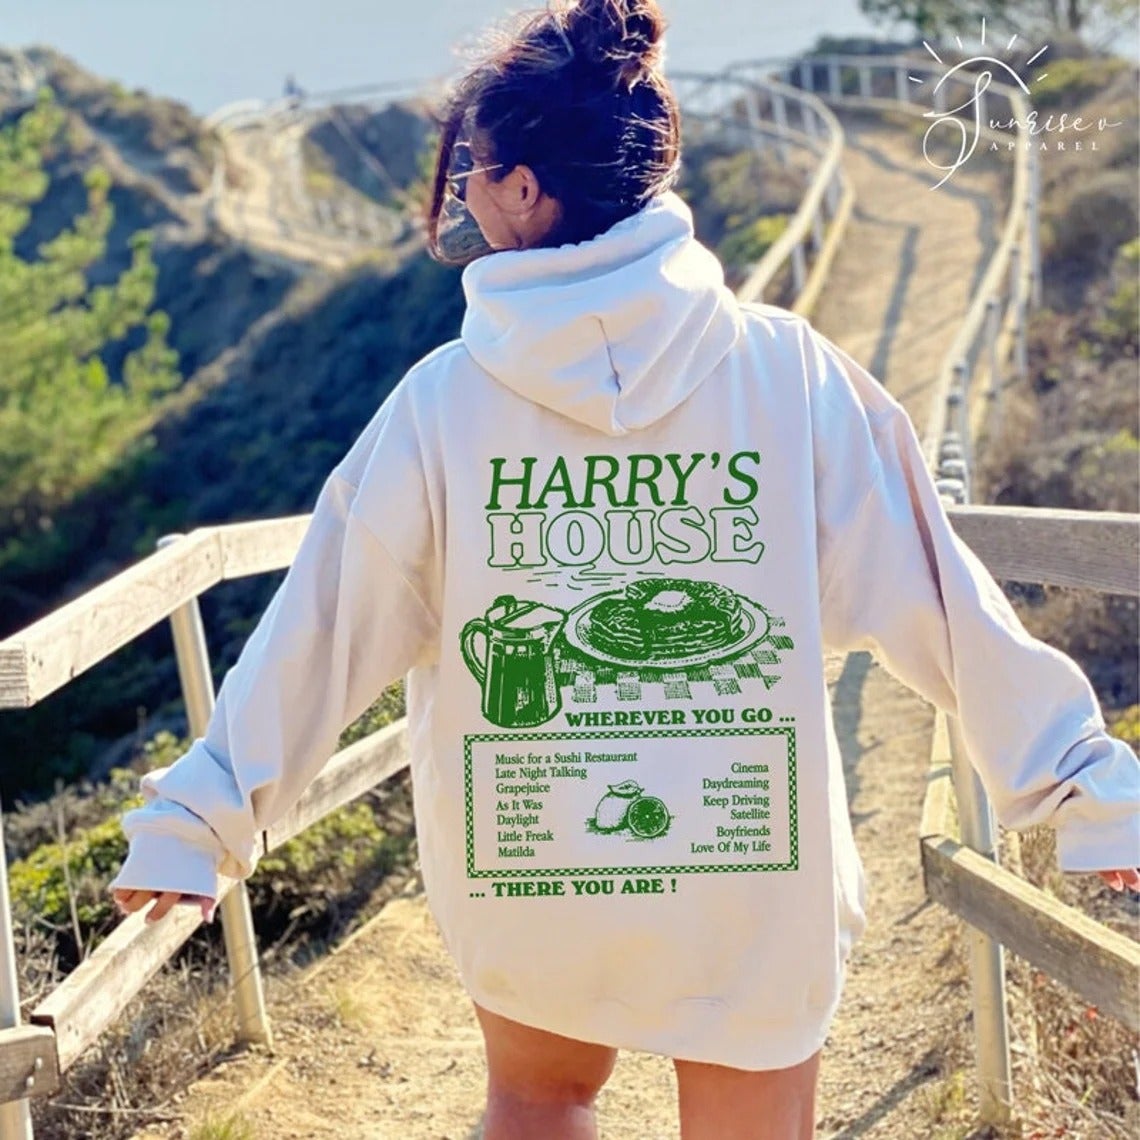 model wearing the white sweatshirt and showing the back with a 'harry's House